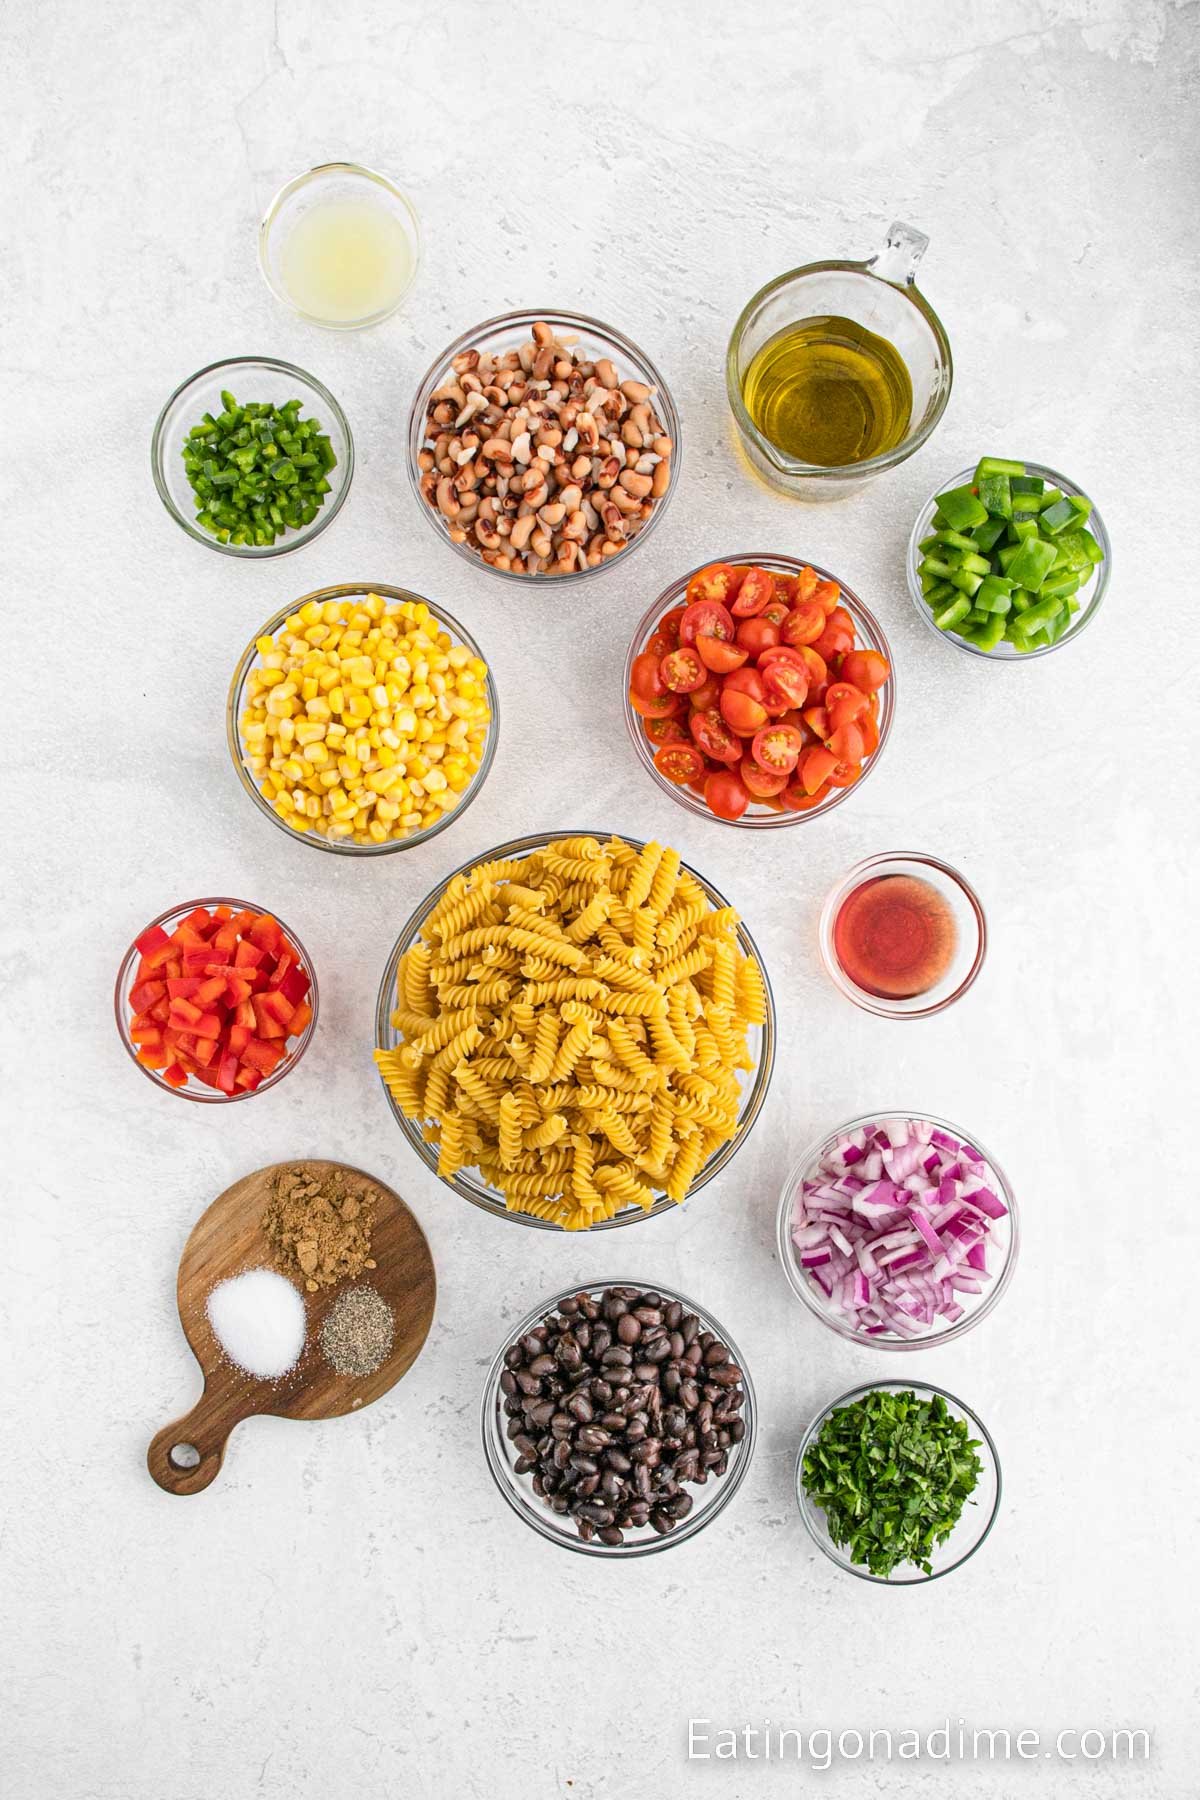 Ingredients needed Rotini pasta, cherry tomatoes, black beans, black eyed peas, corn, red onion, green bell pepper, red bell pepper, jalapeno pepper, fresh cilantro, olive oil, red wine vinegar, lime juice, cumin, salt, pepper